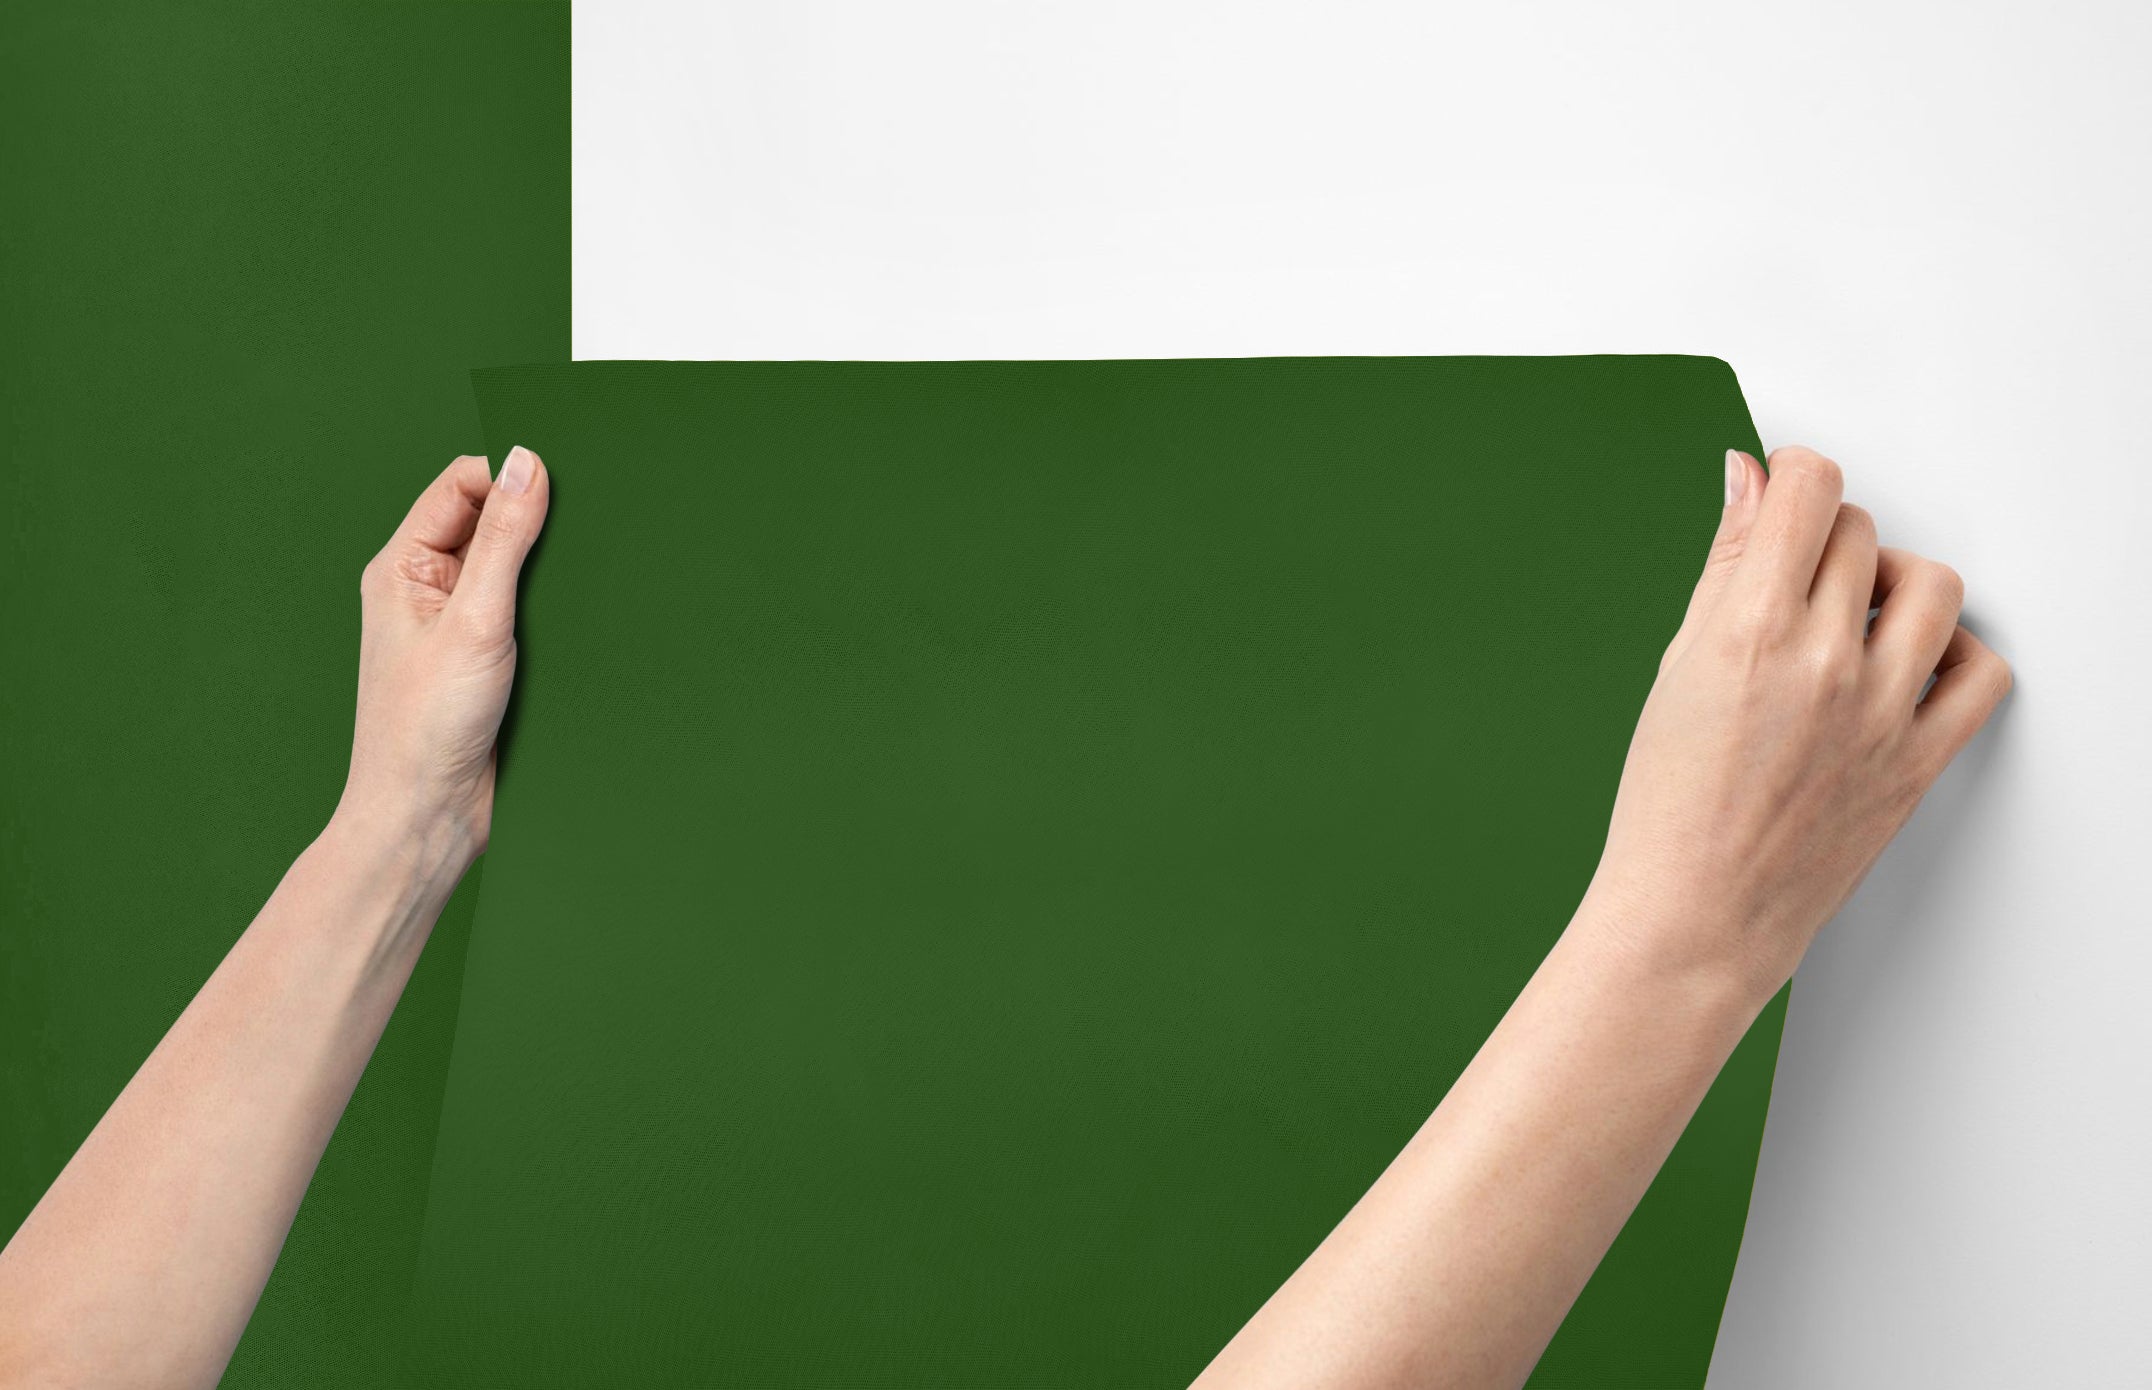 Peel & Stick Removable Re-usable Paint - Color RAL 6002 Leaf Green - offRAL™ - RALRAW LLC, USA